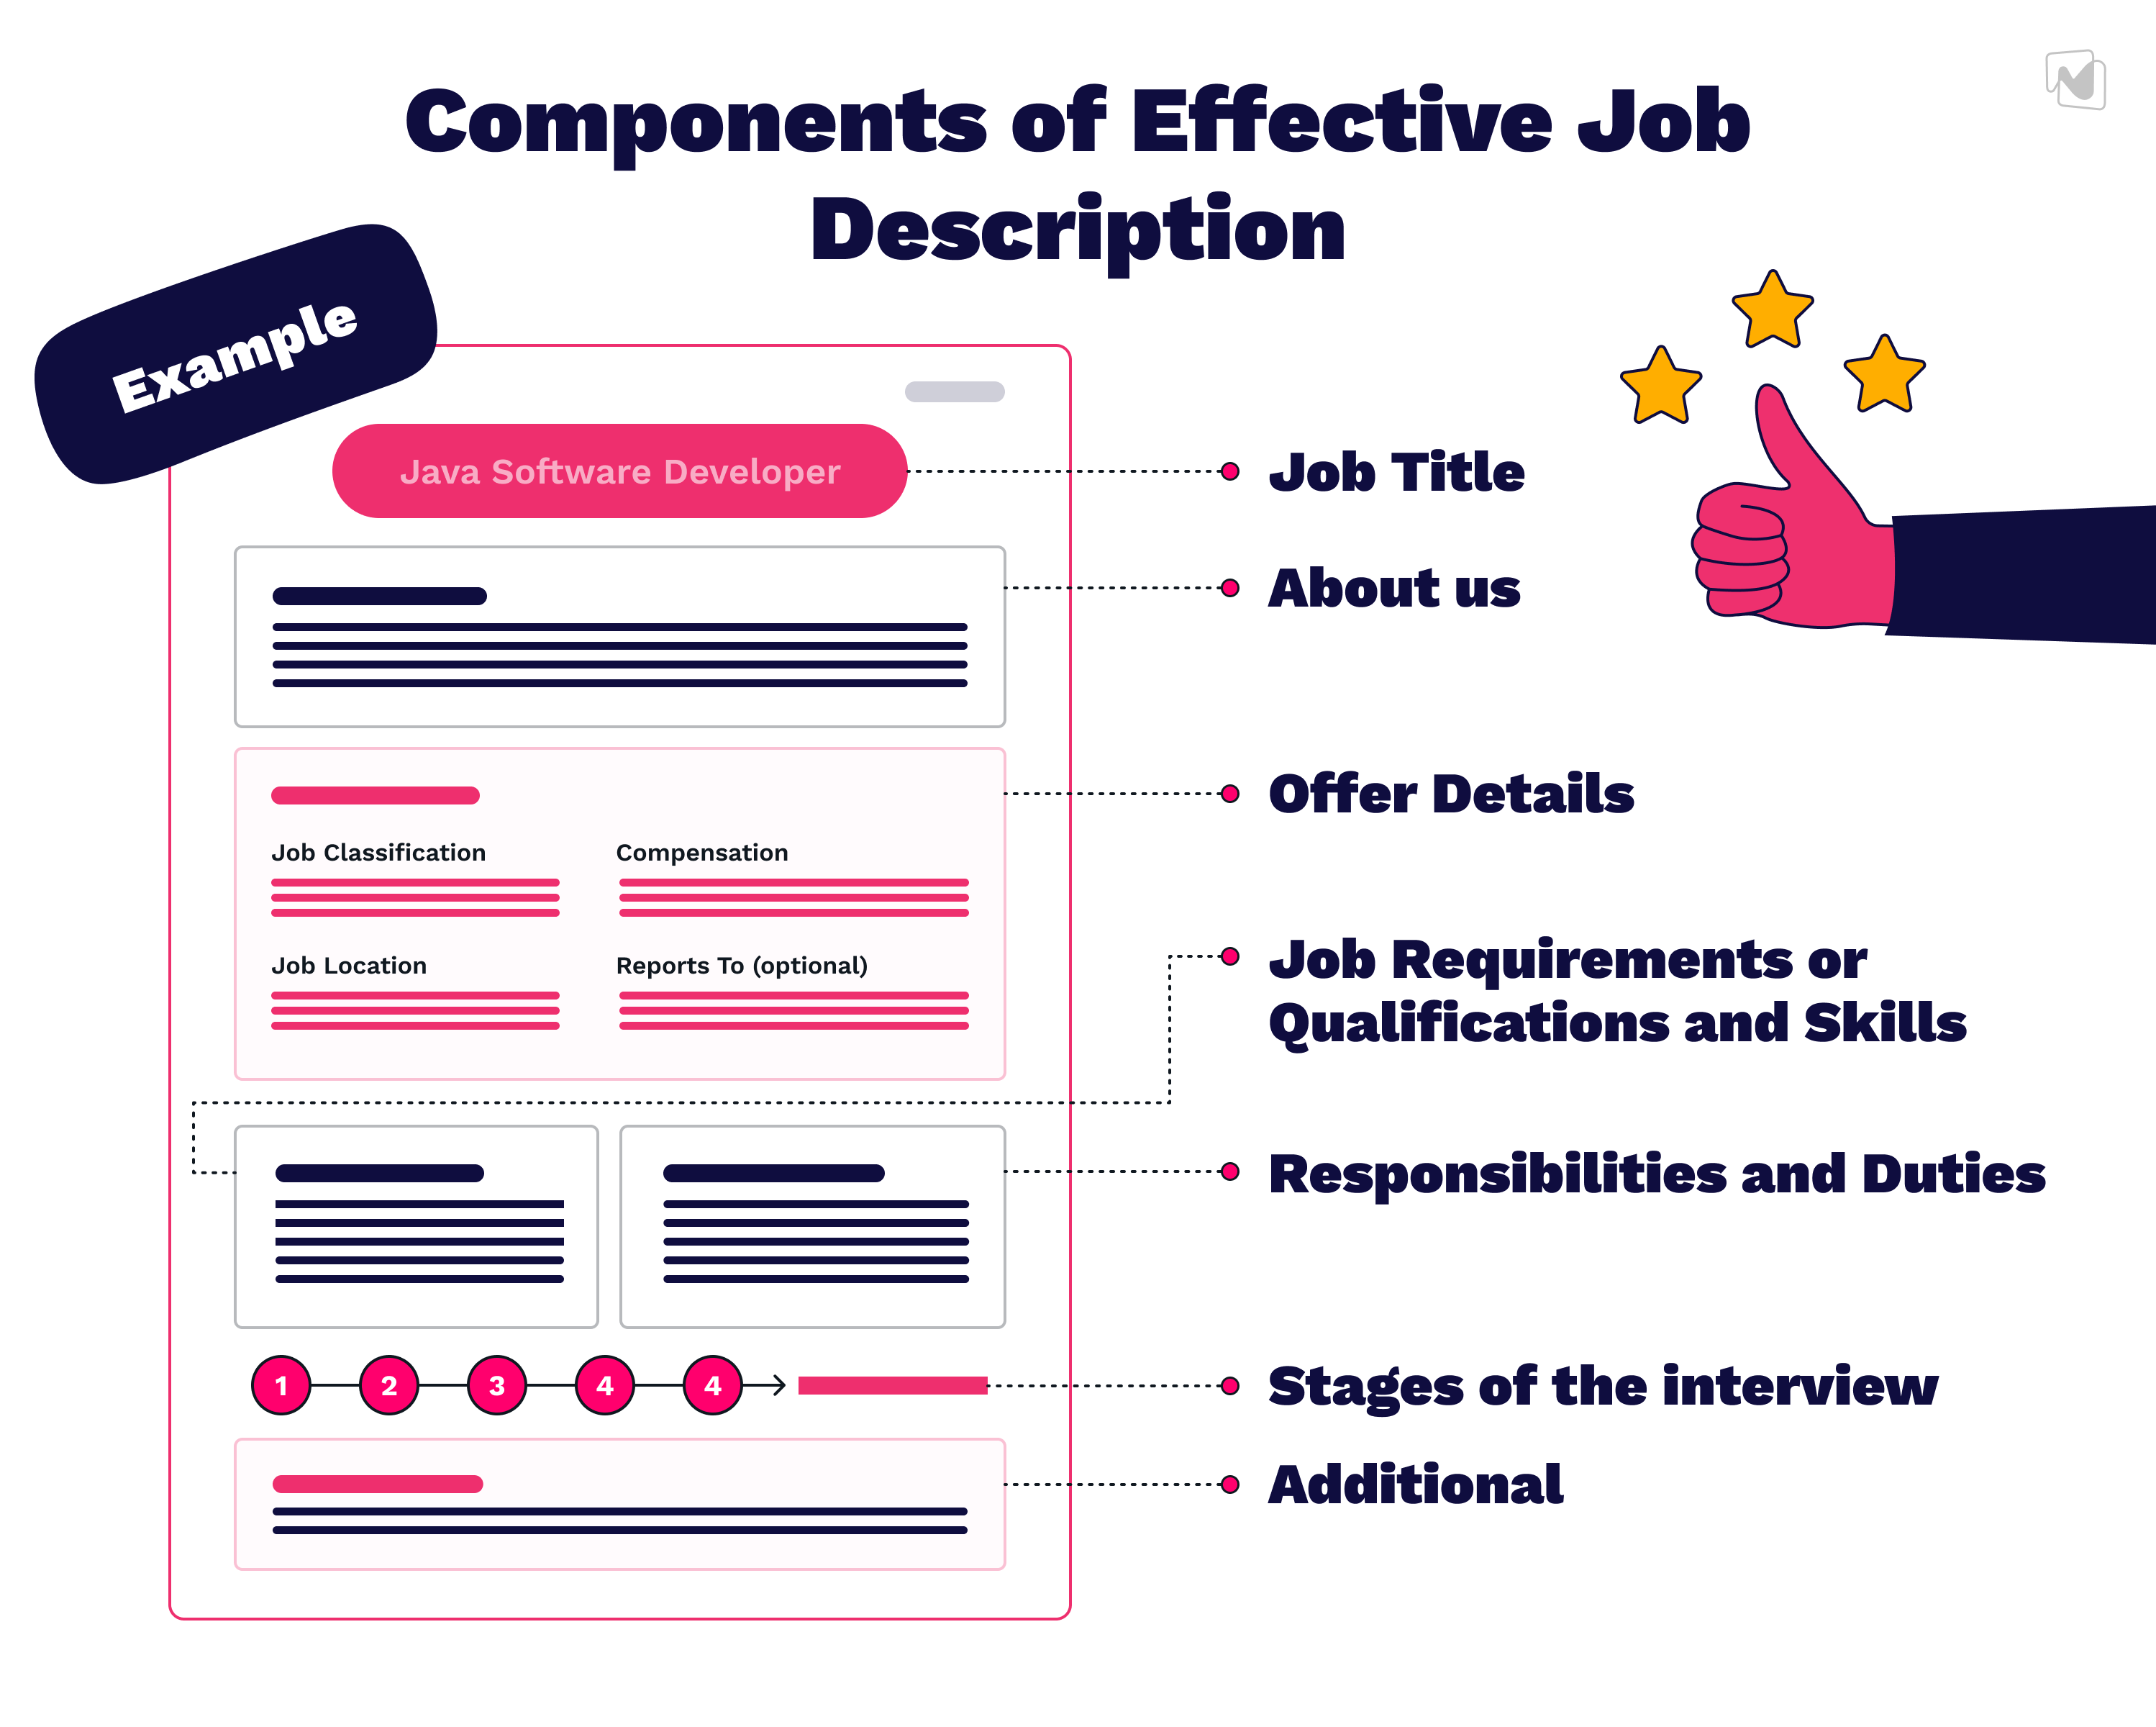 The Role of Job Descriptions in Attracting IT Candidates